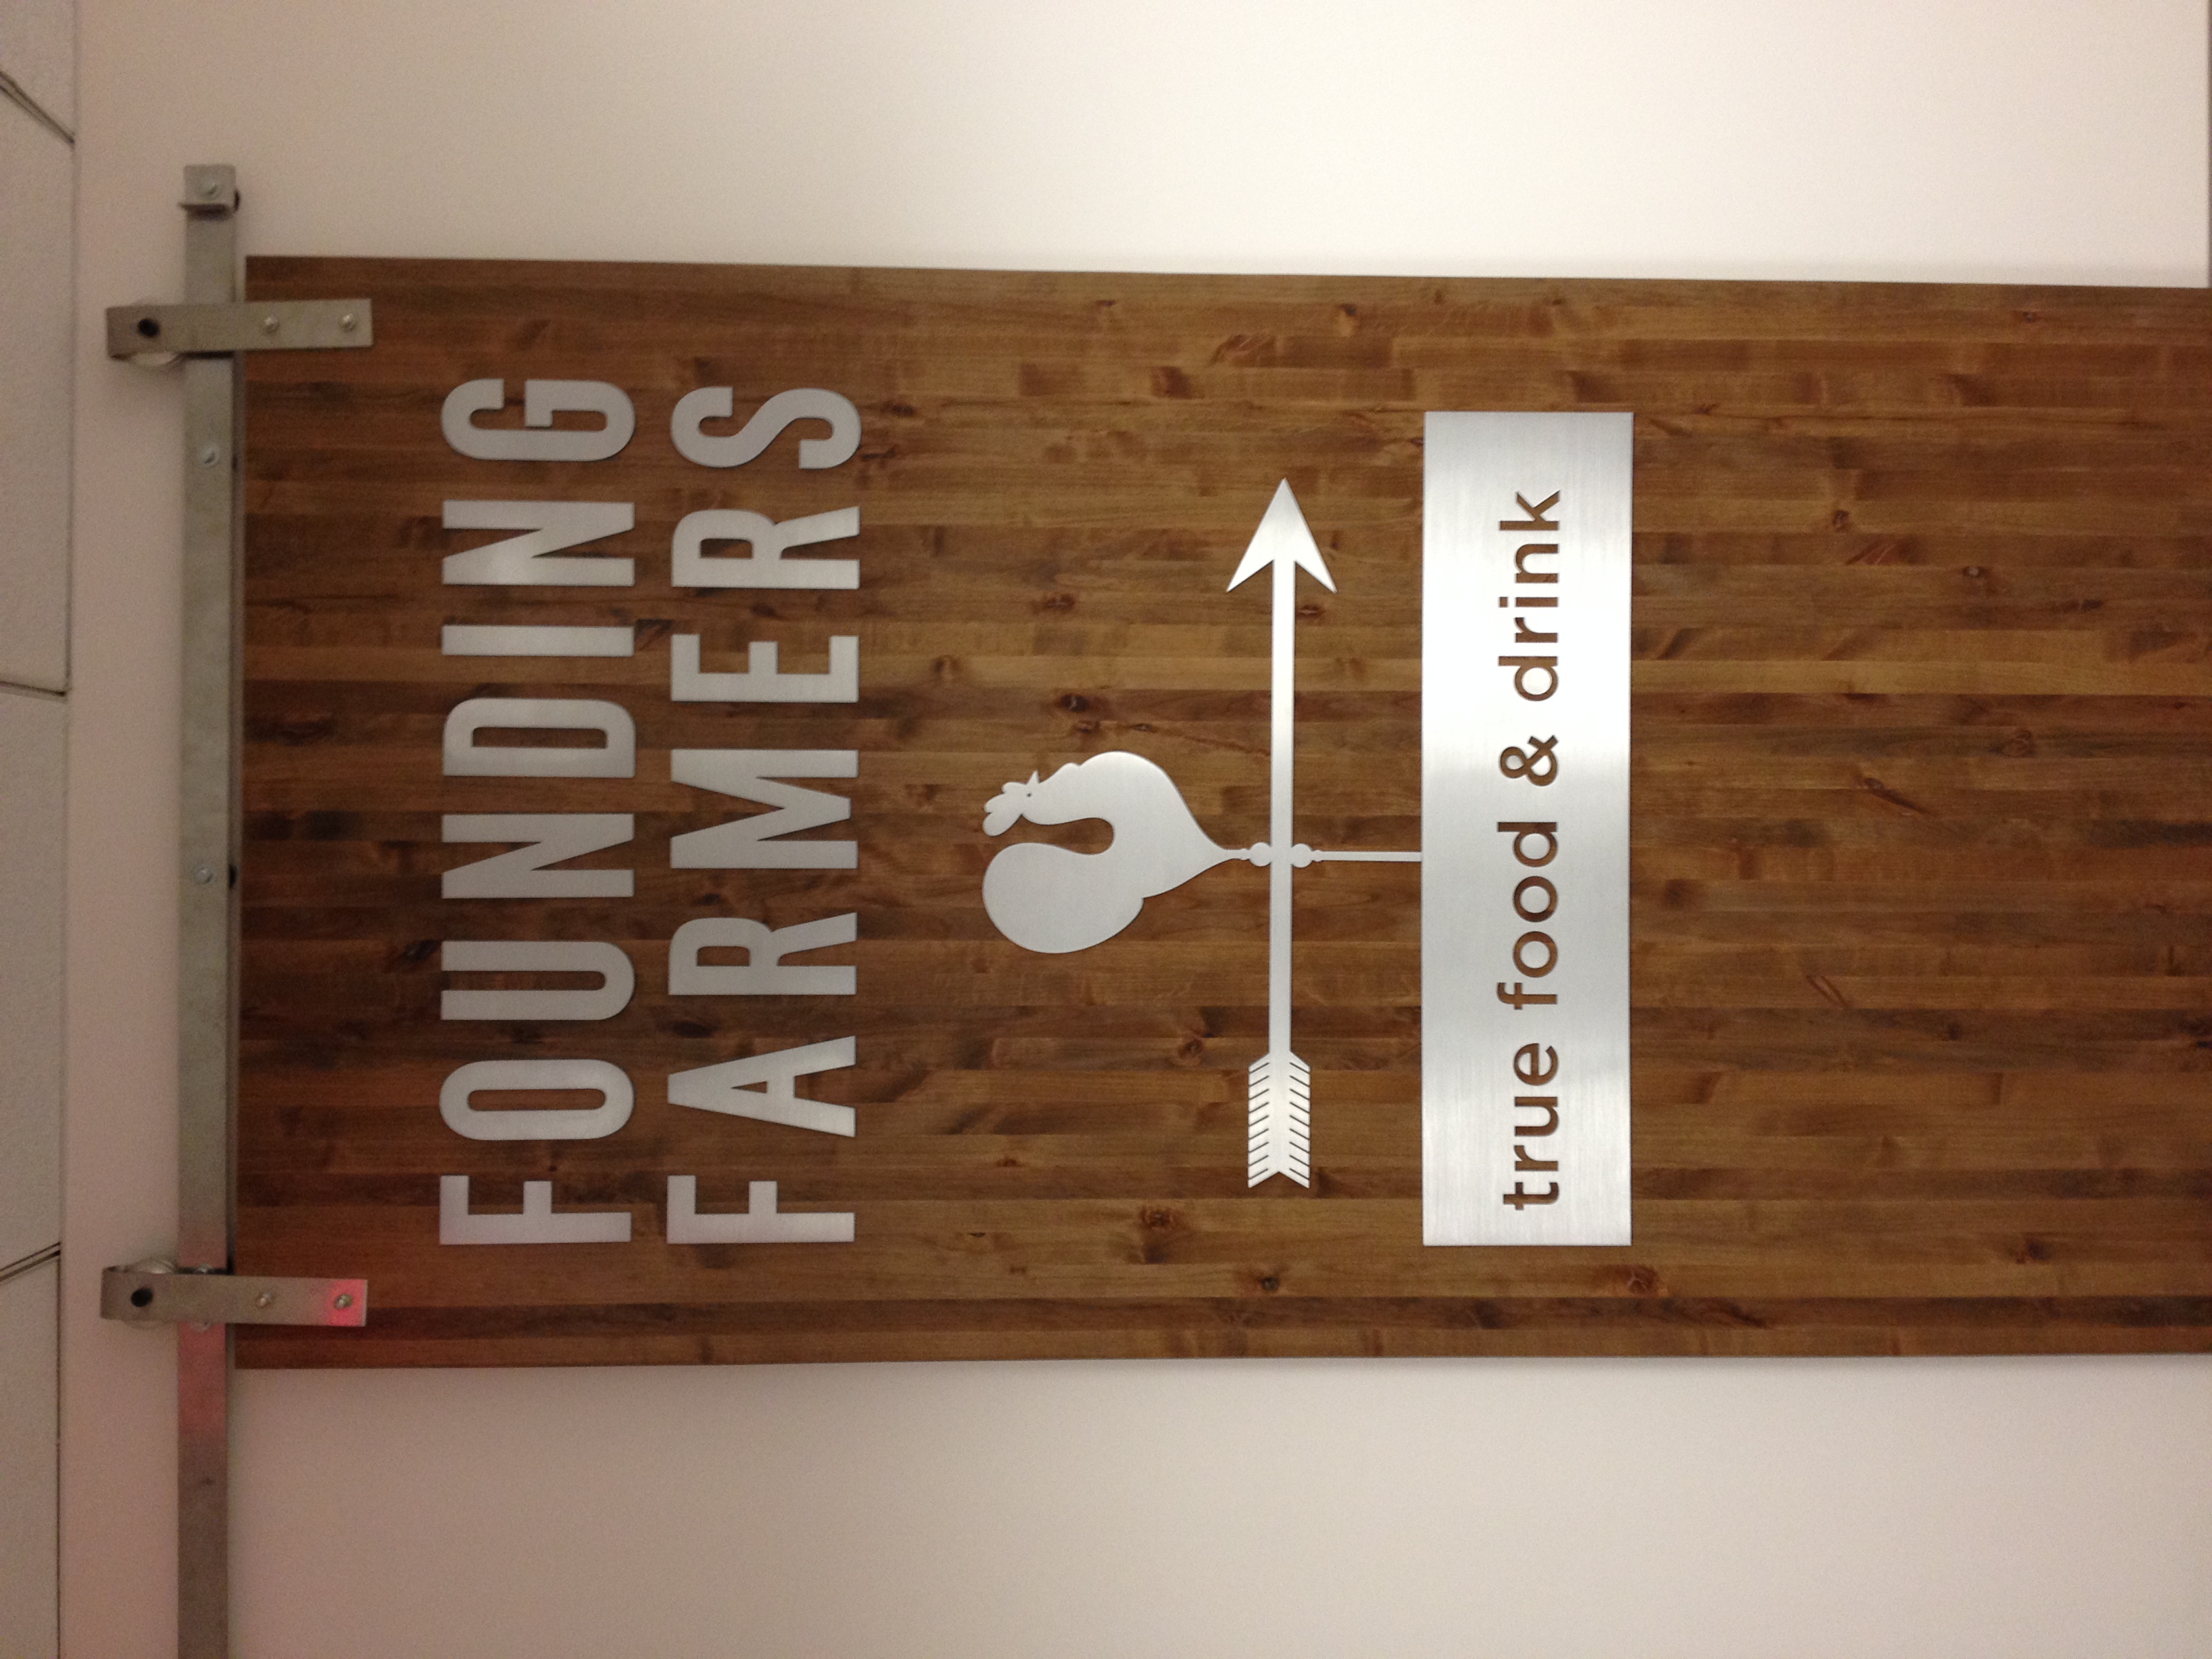 Die-cut solid aluminum letters for Founding Farmers